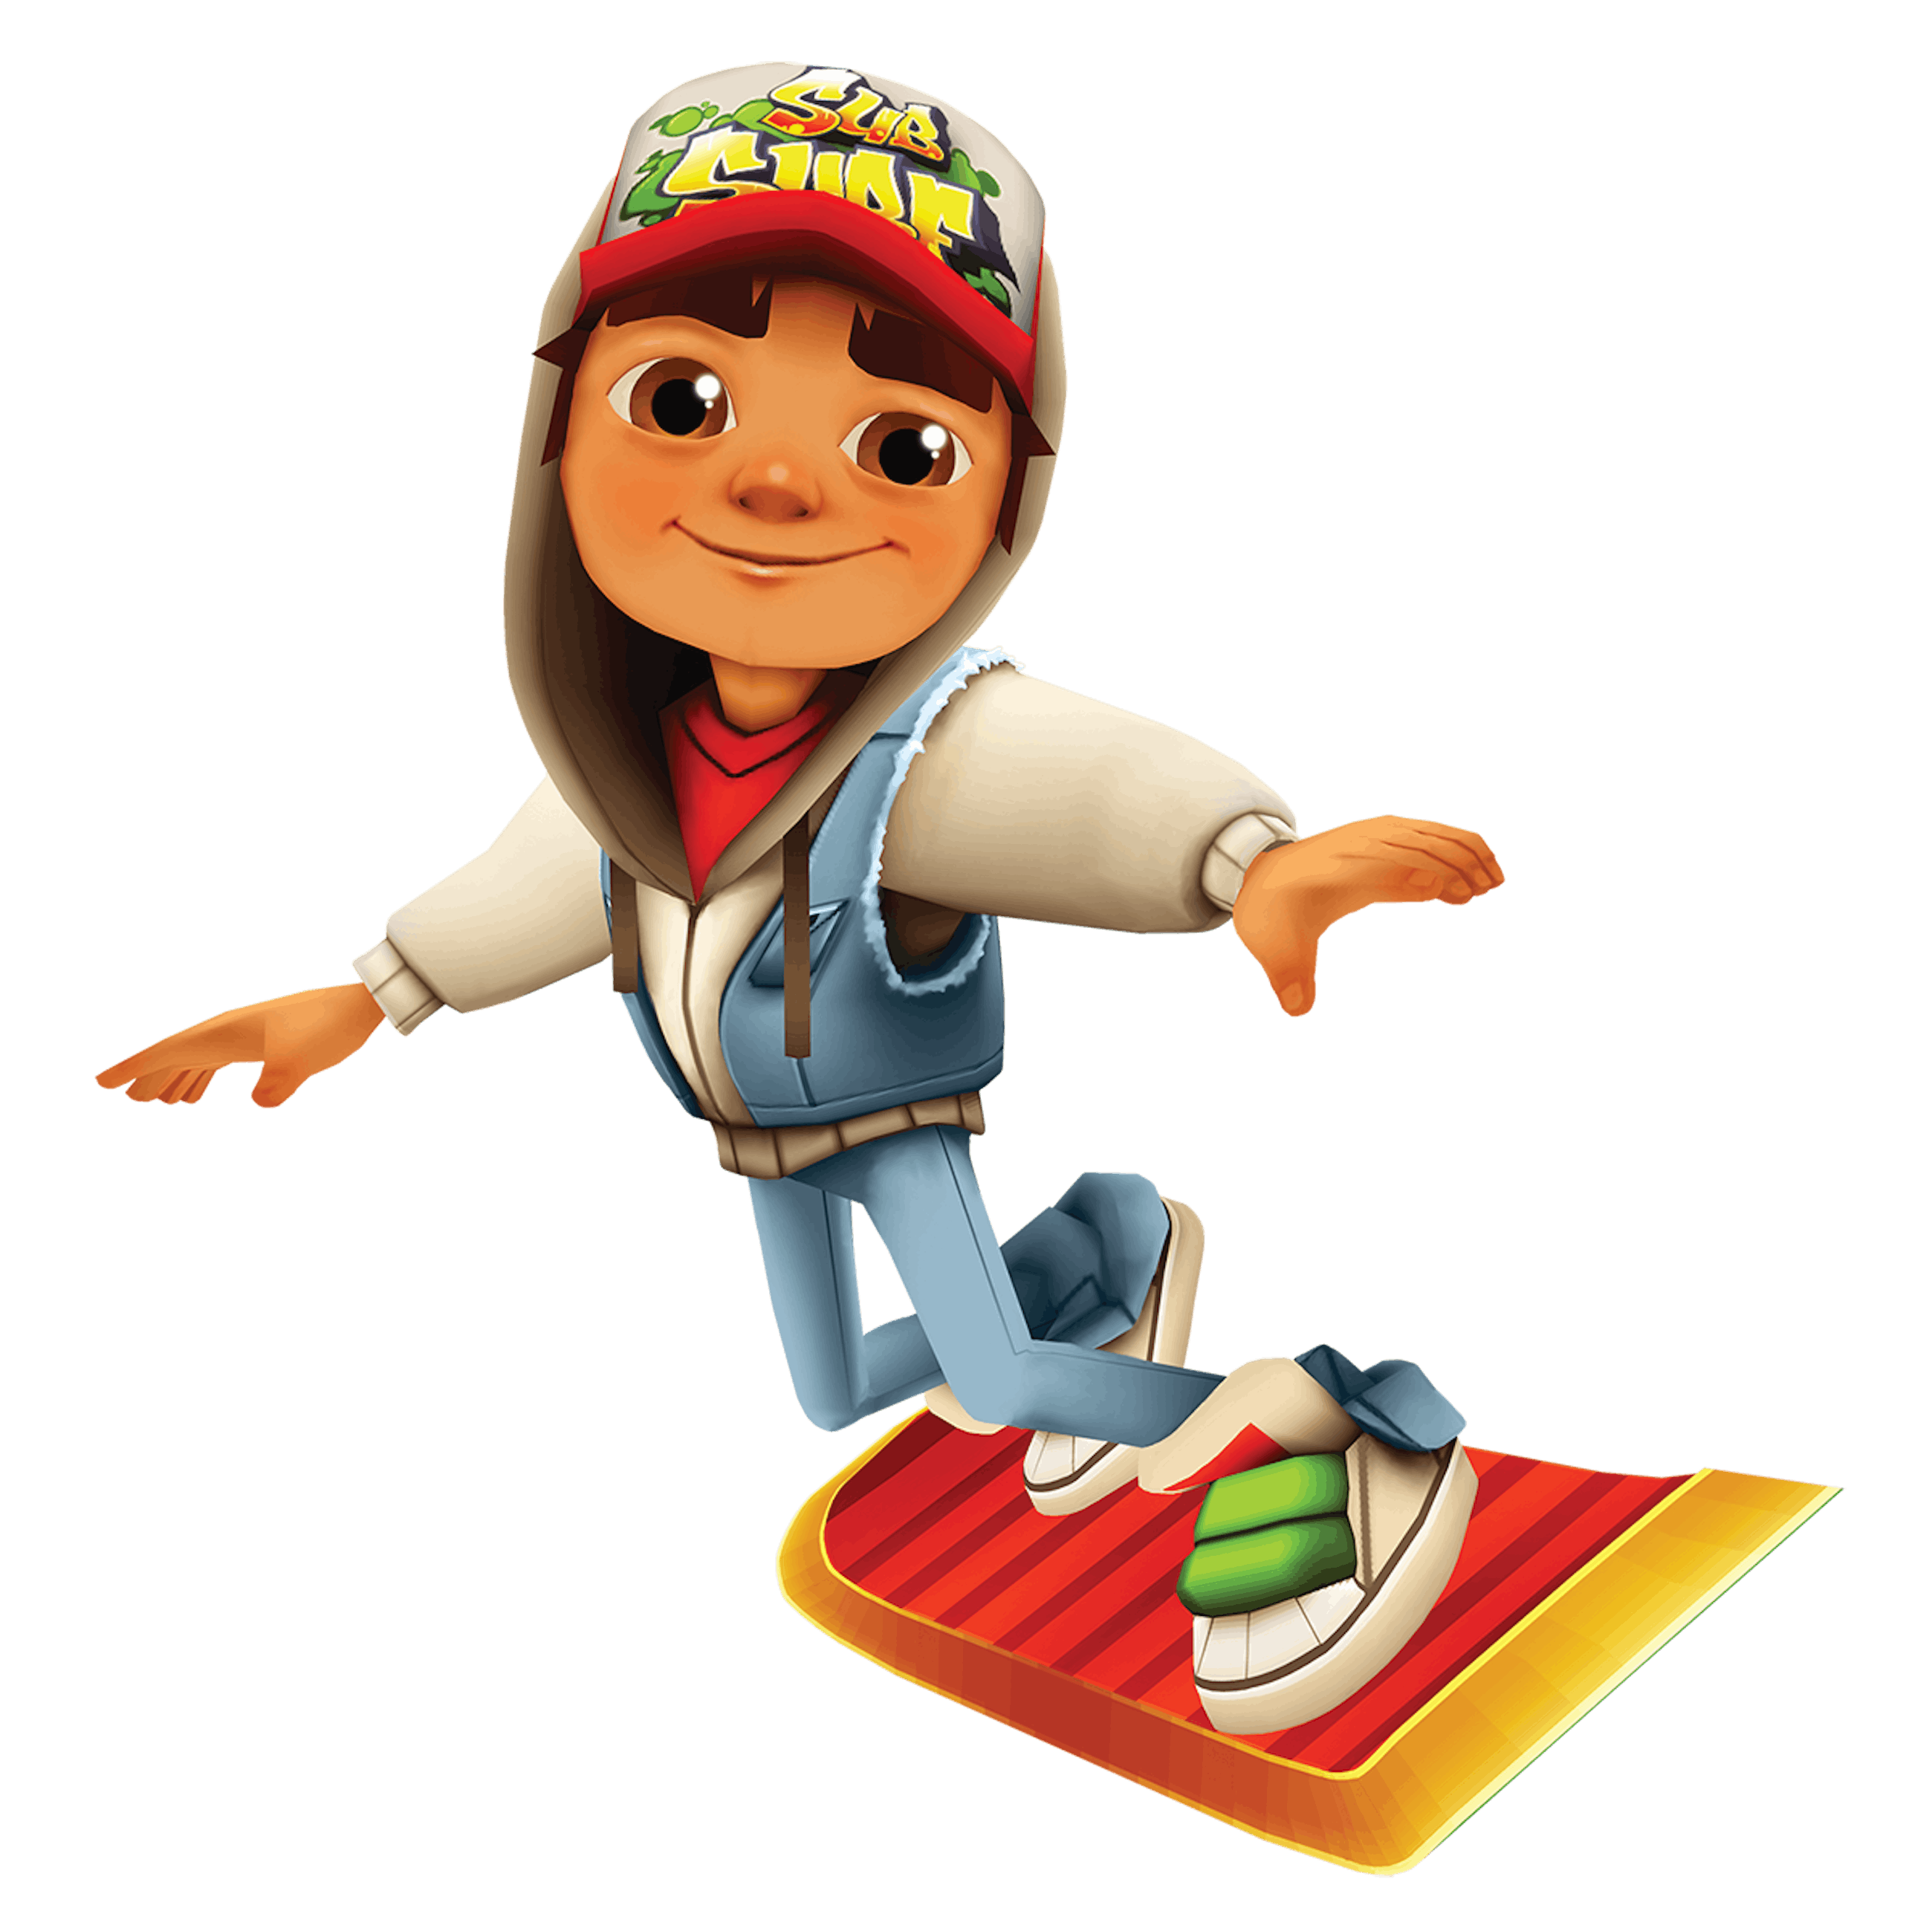 Subway Surfers - Get to know the newest member of the Crew ℹ️